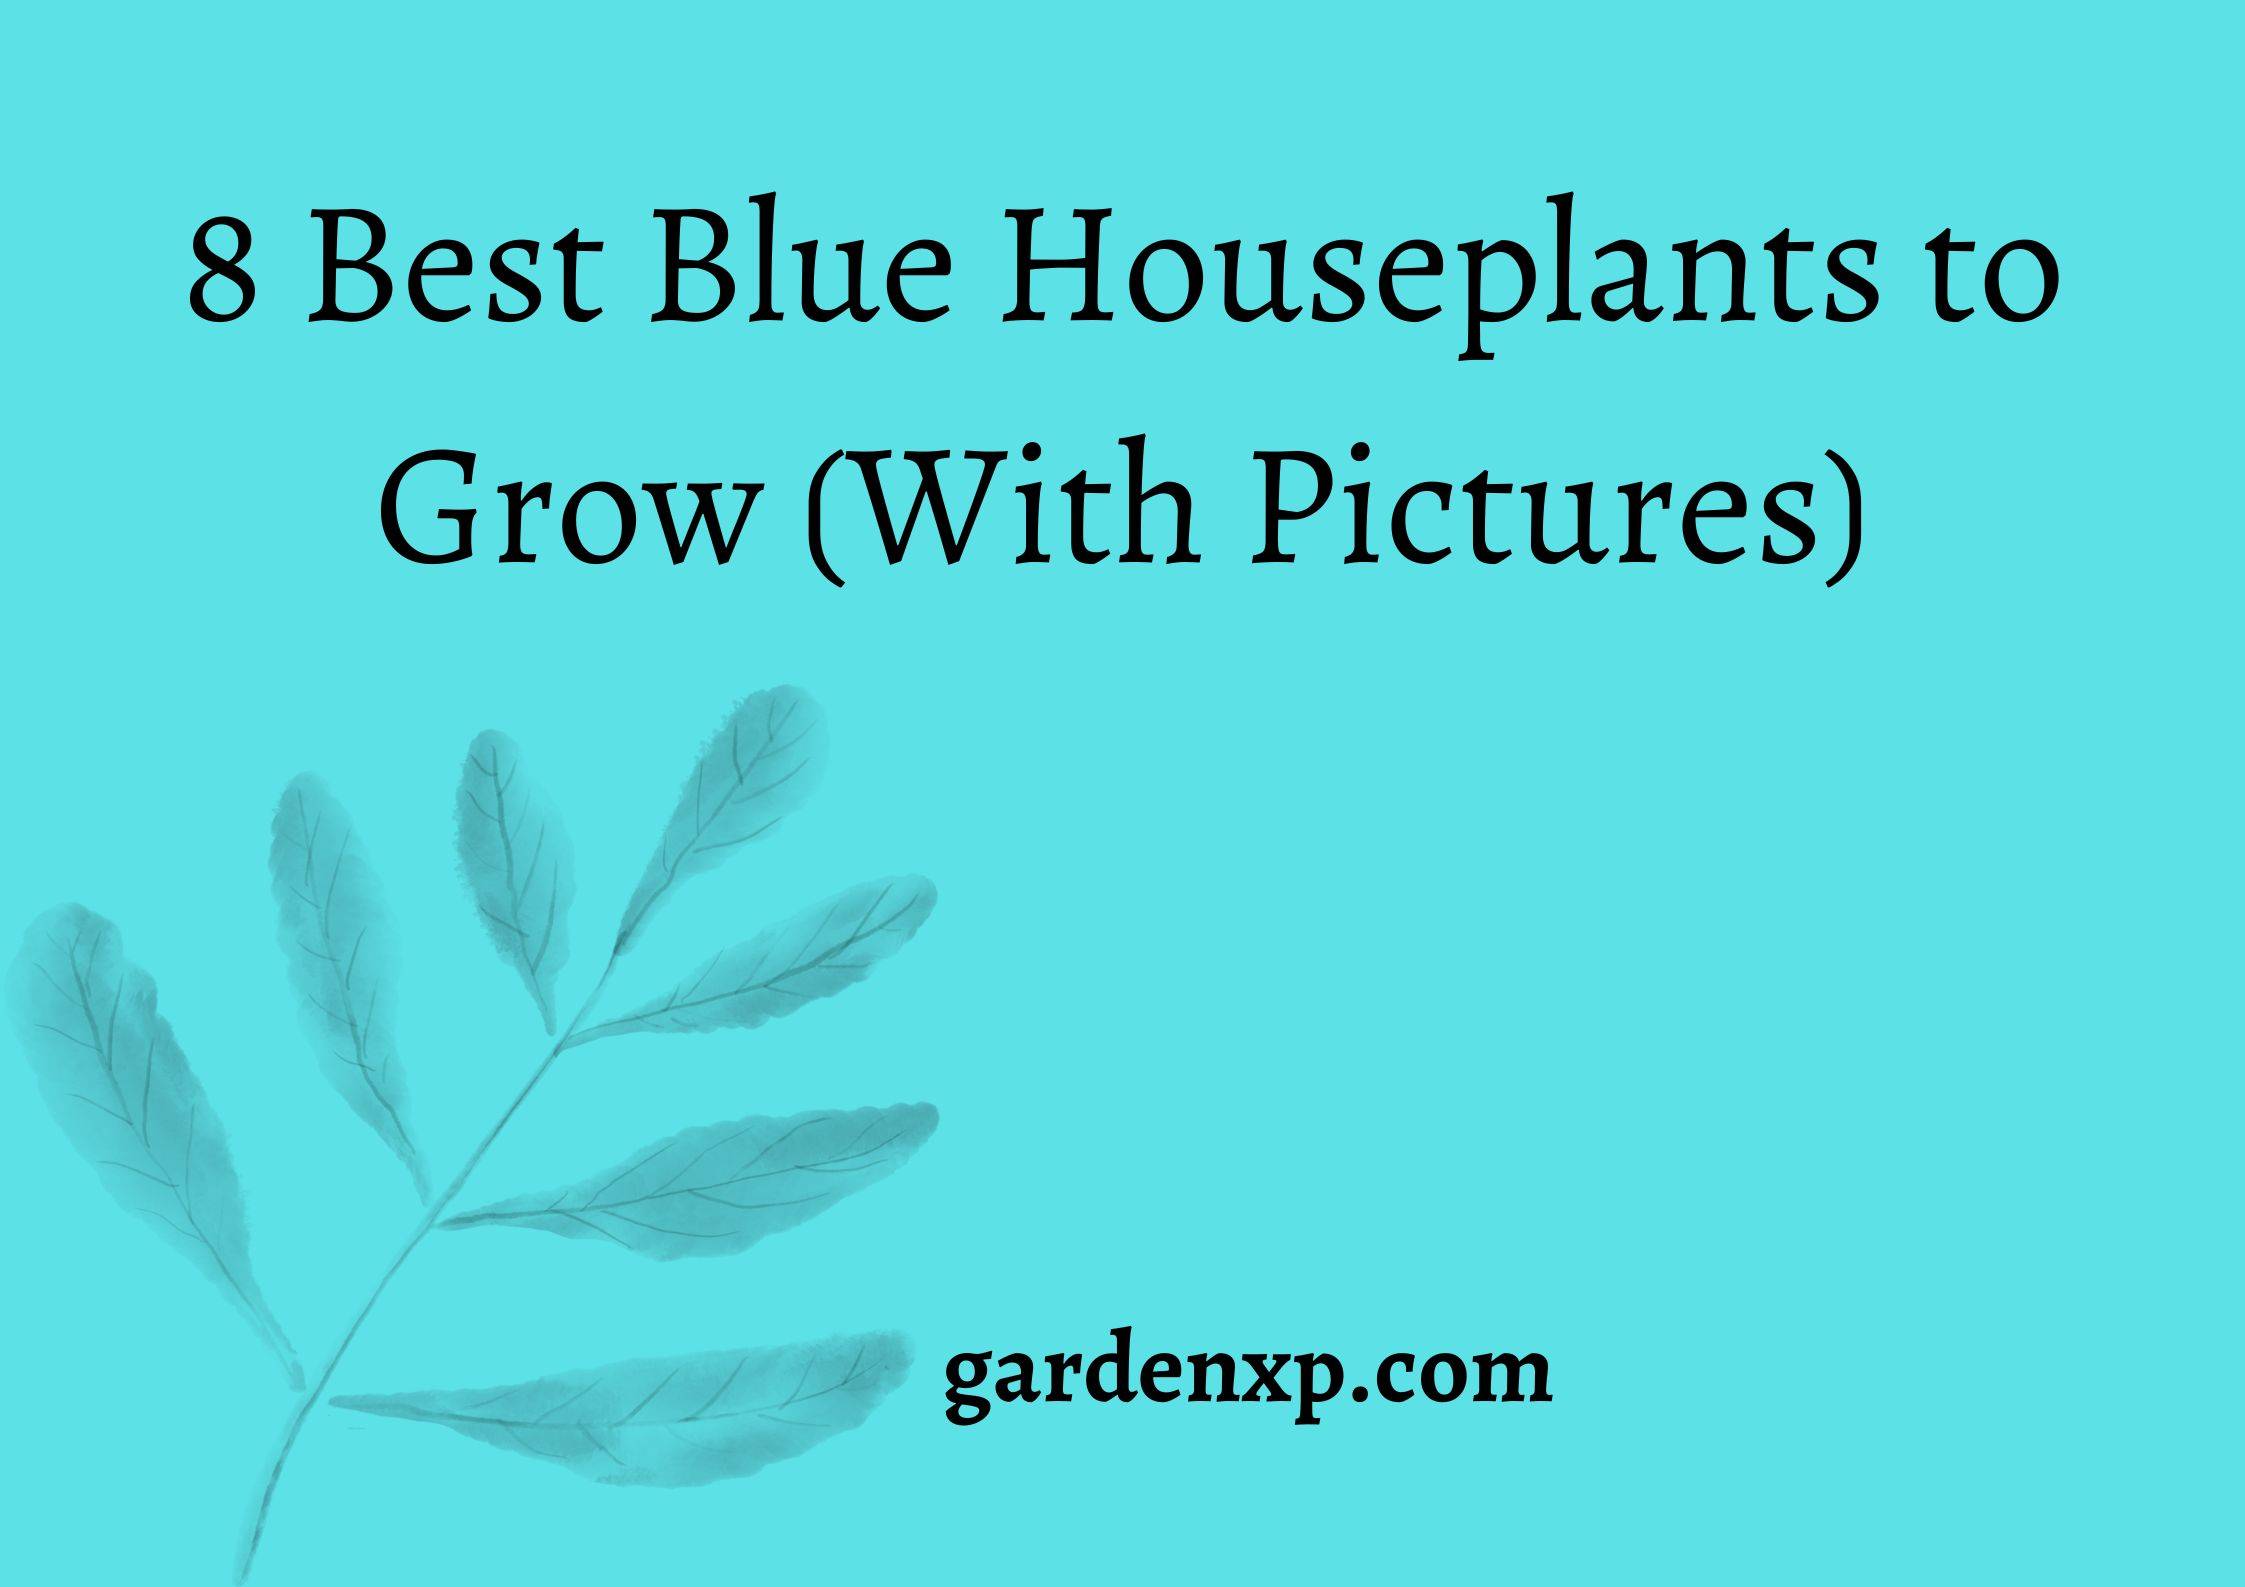 8 Best Blue Houseplants to Grow (With Pictures)